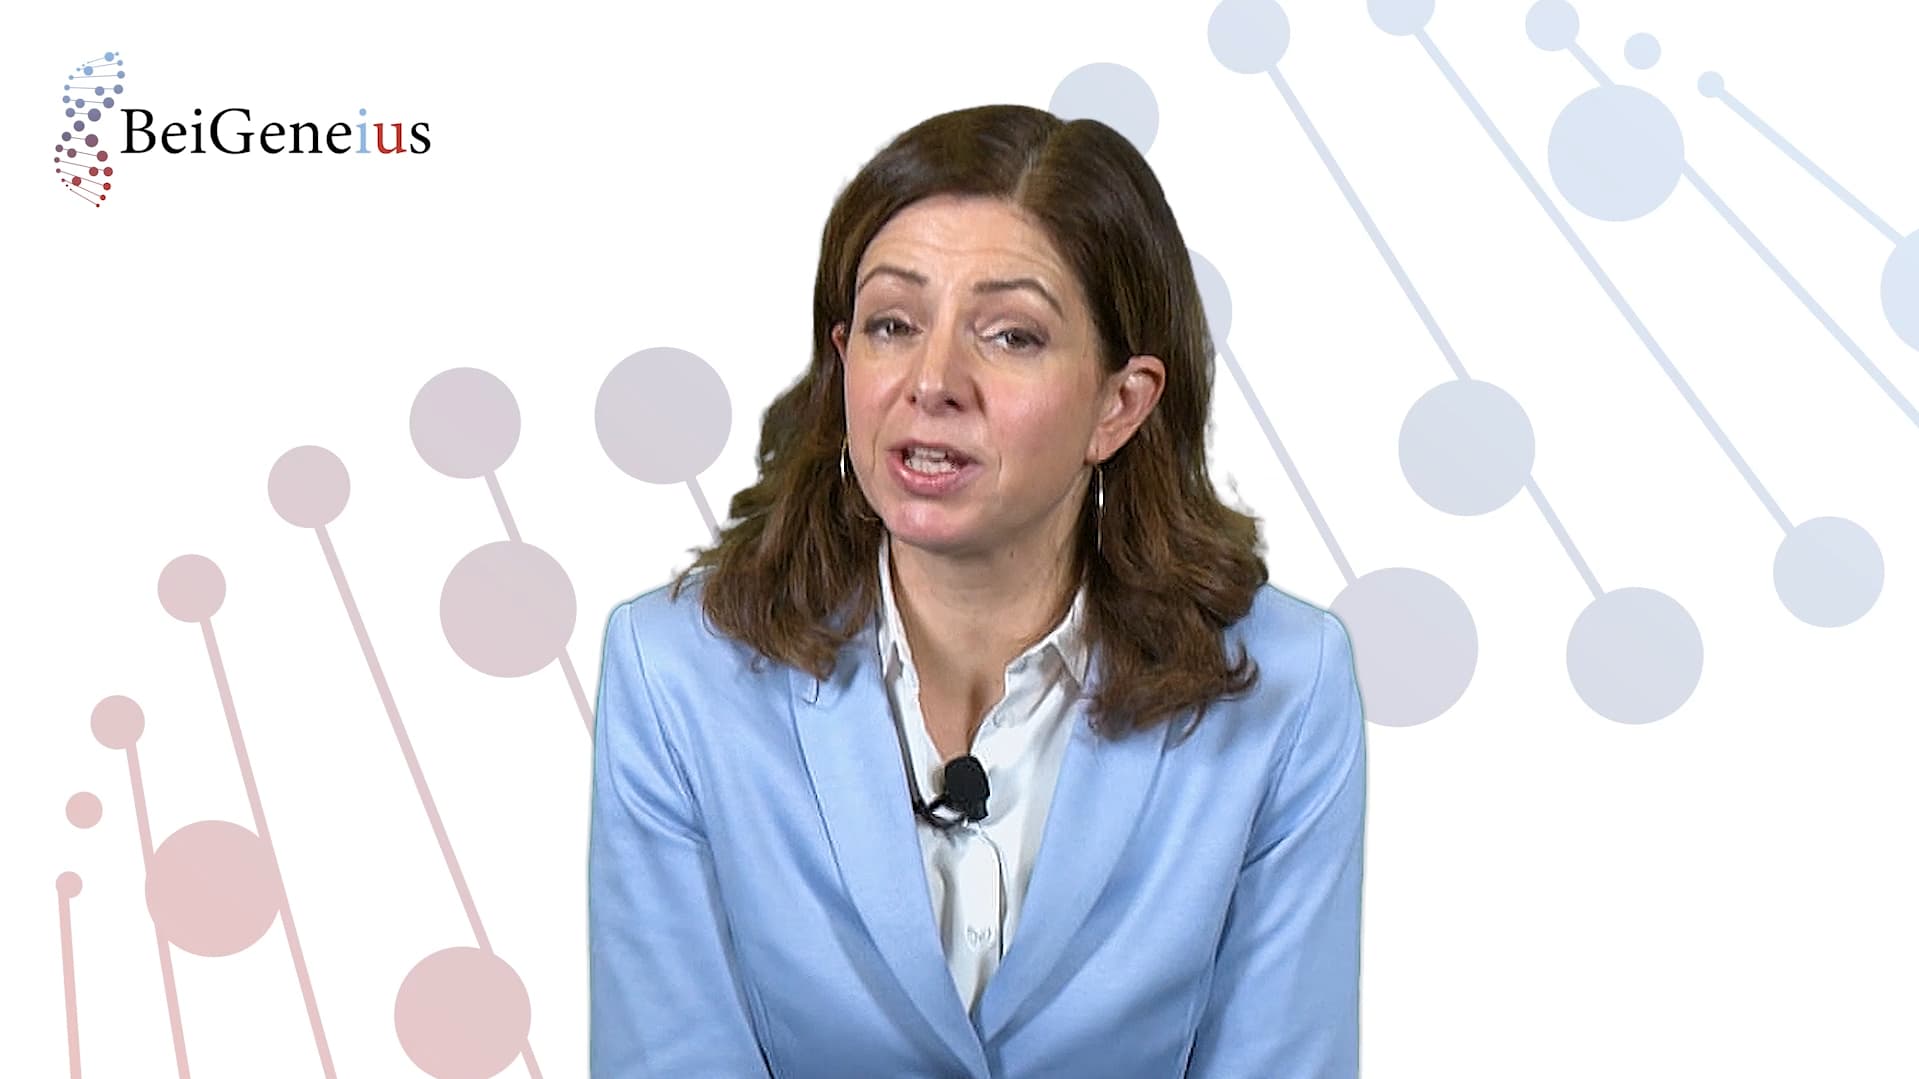 BeiGeneius (heme) - Talking head video - What to expect in 2024 for CLL - Eichhorst